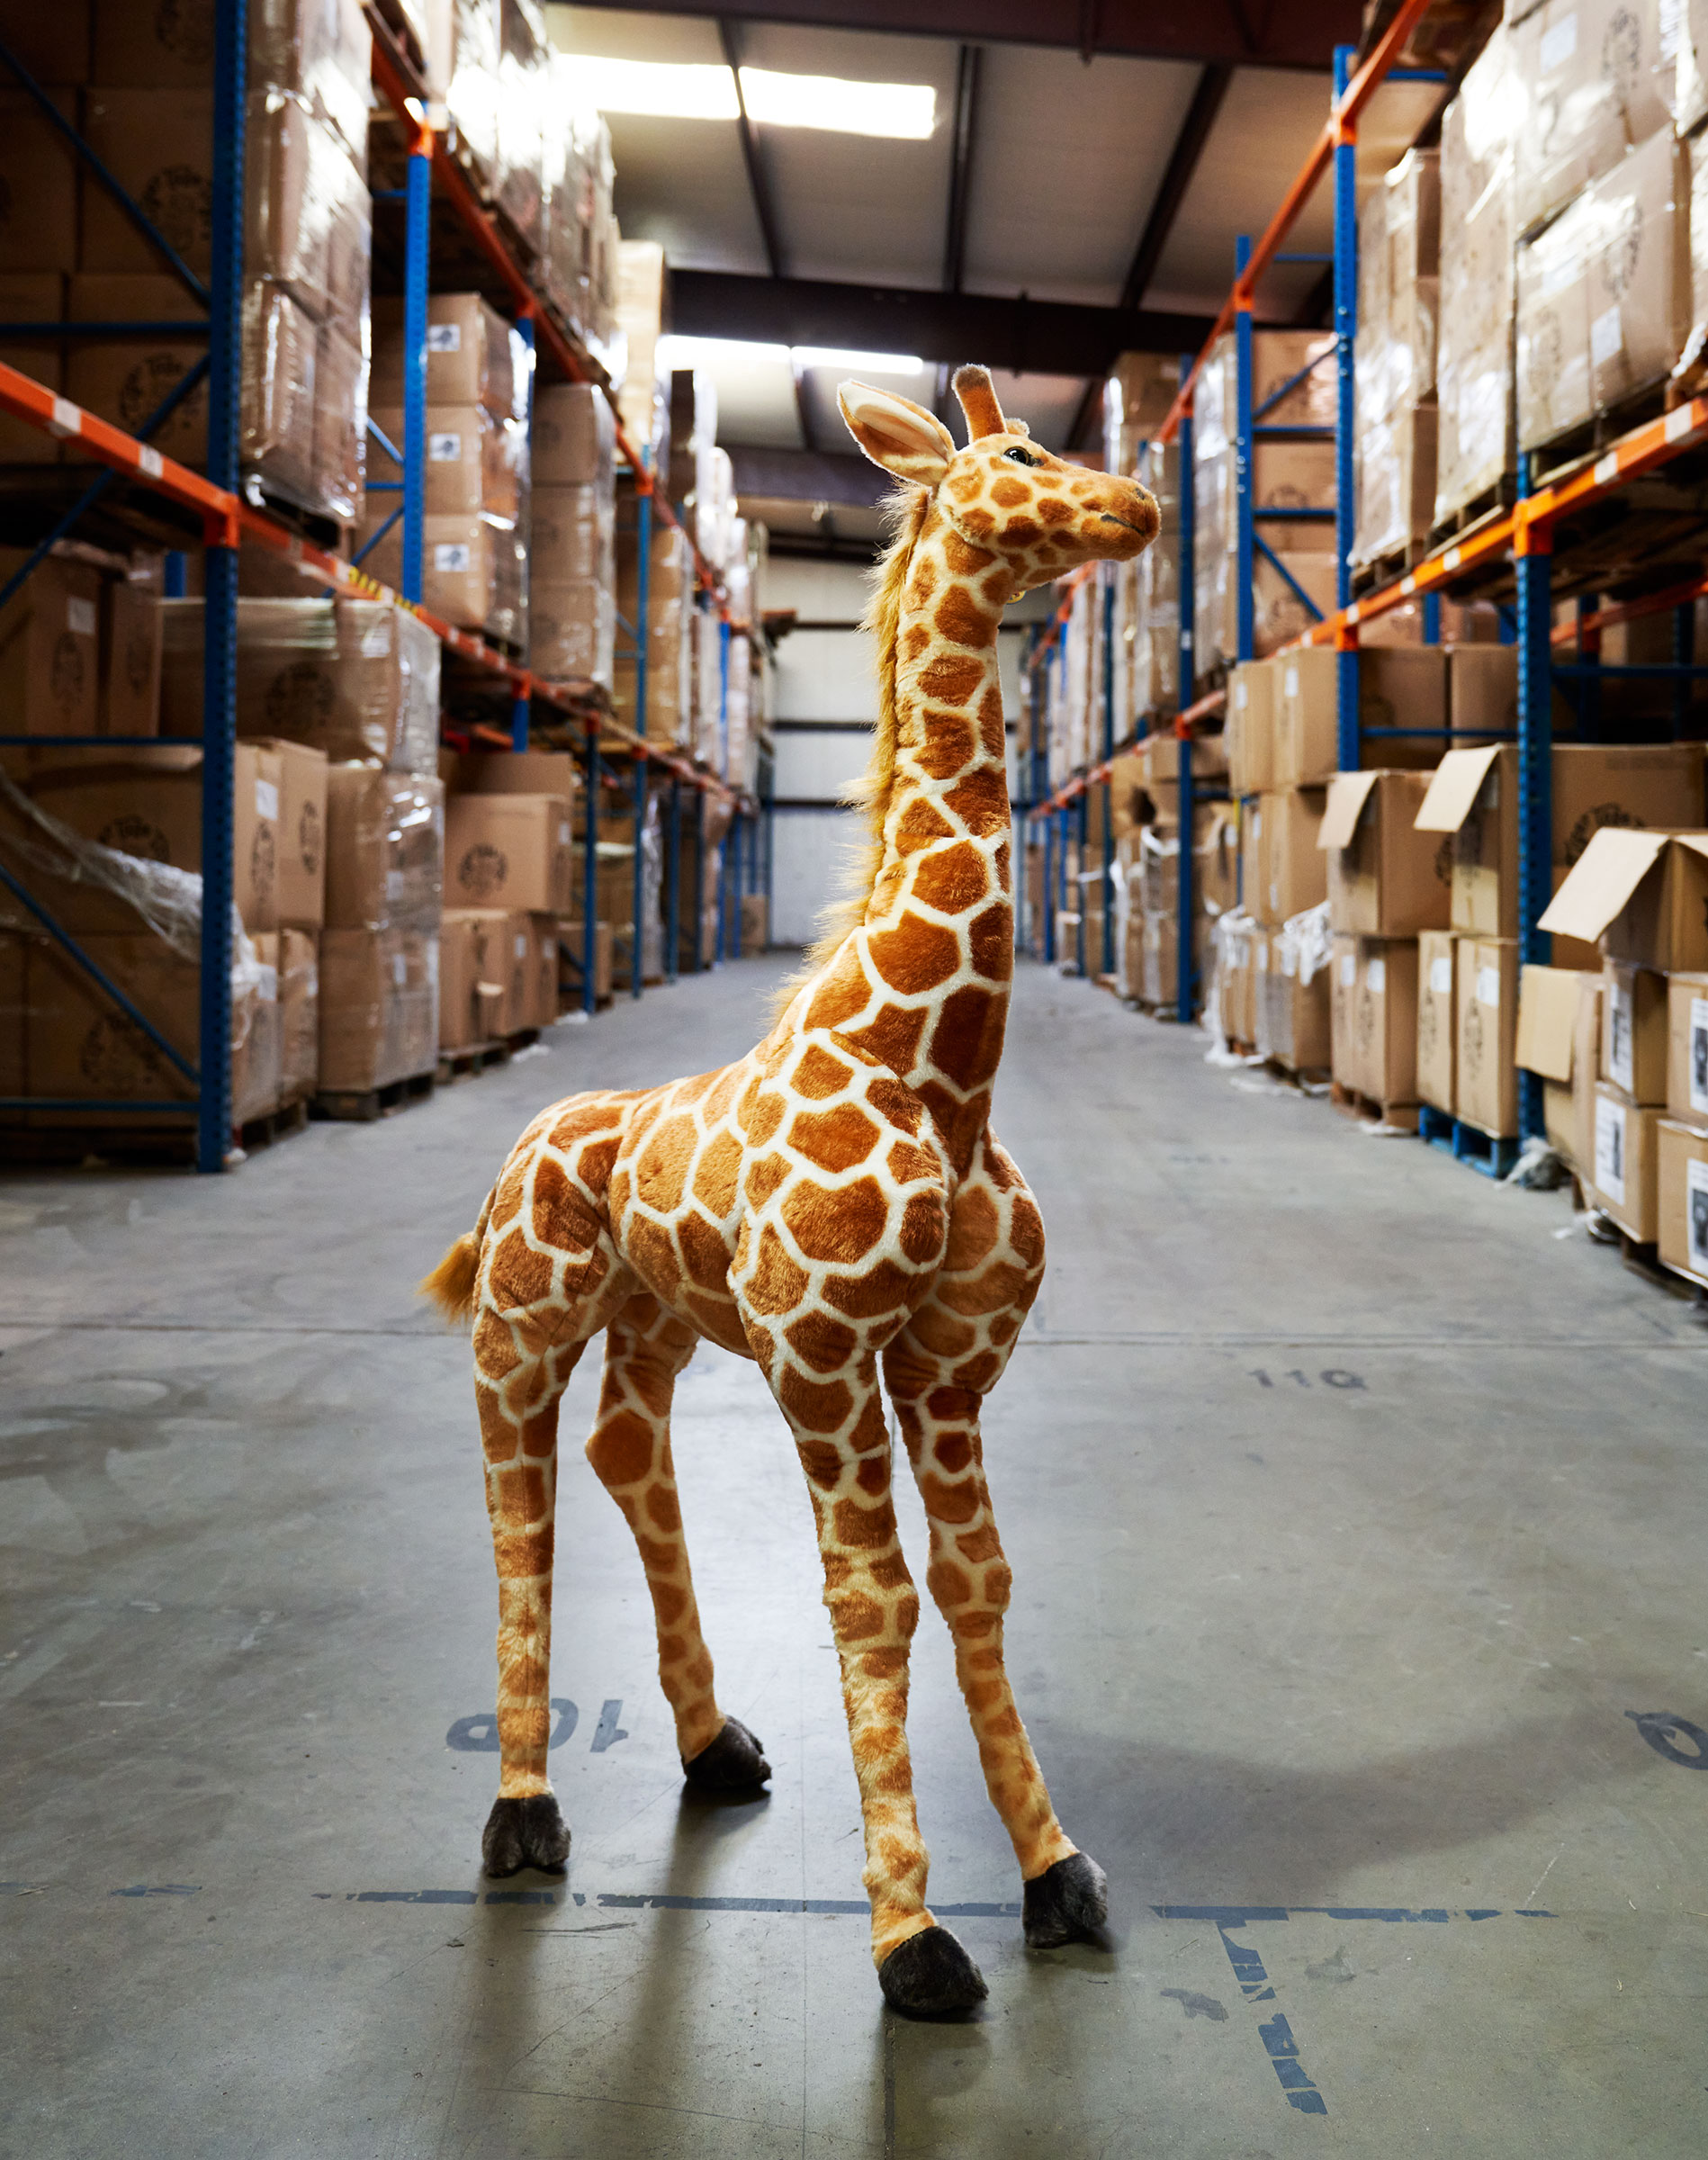 Jani the giraffe at the Viahart distribution facility in Wills Point, Texas on July 23, 2021. (Jonathan Zizzo for TIME)